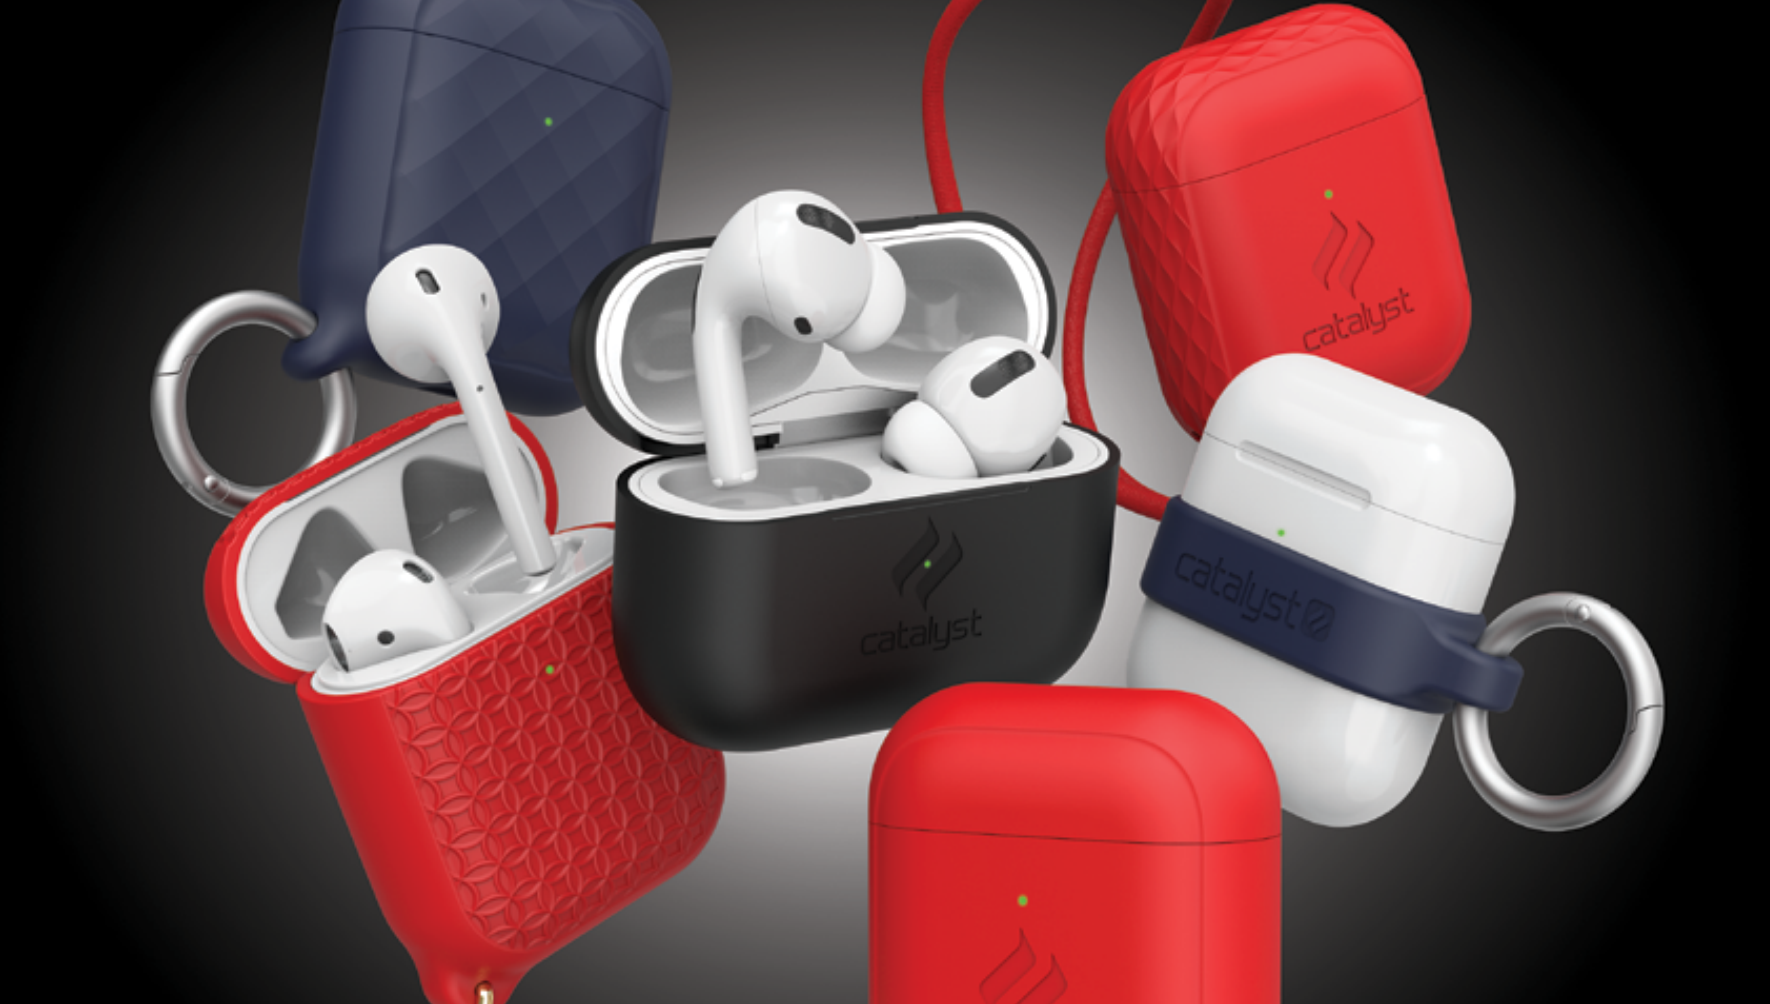 Catalyst AirPods cases